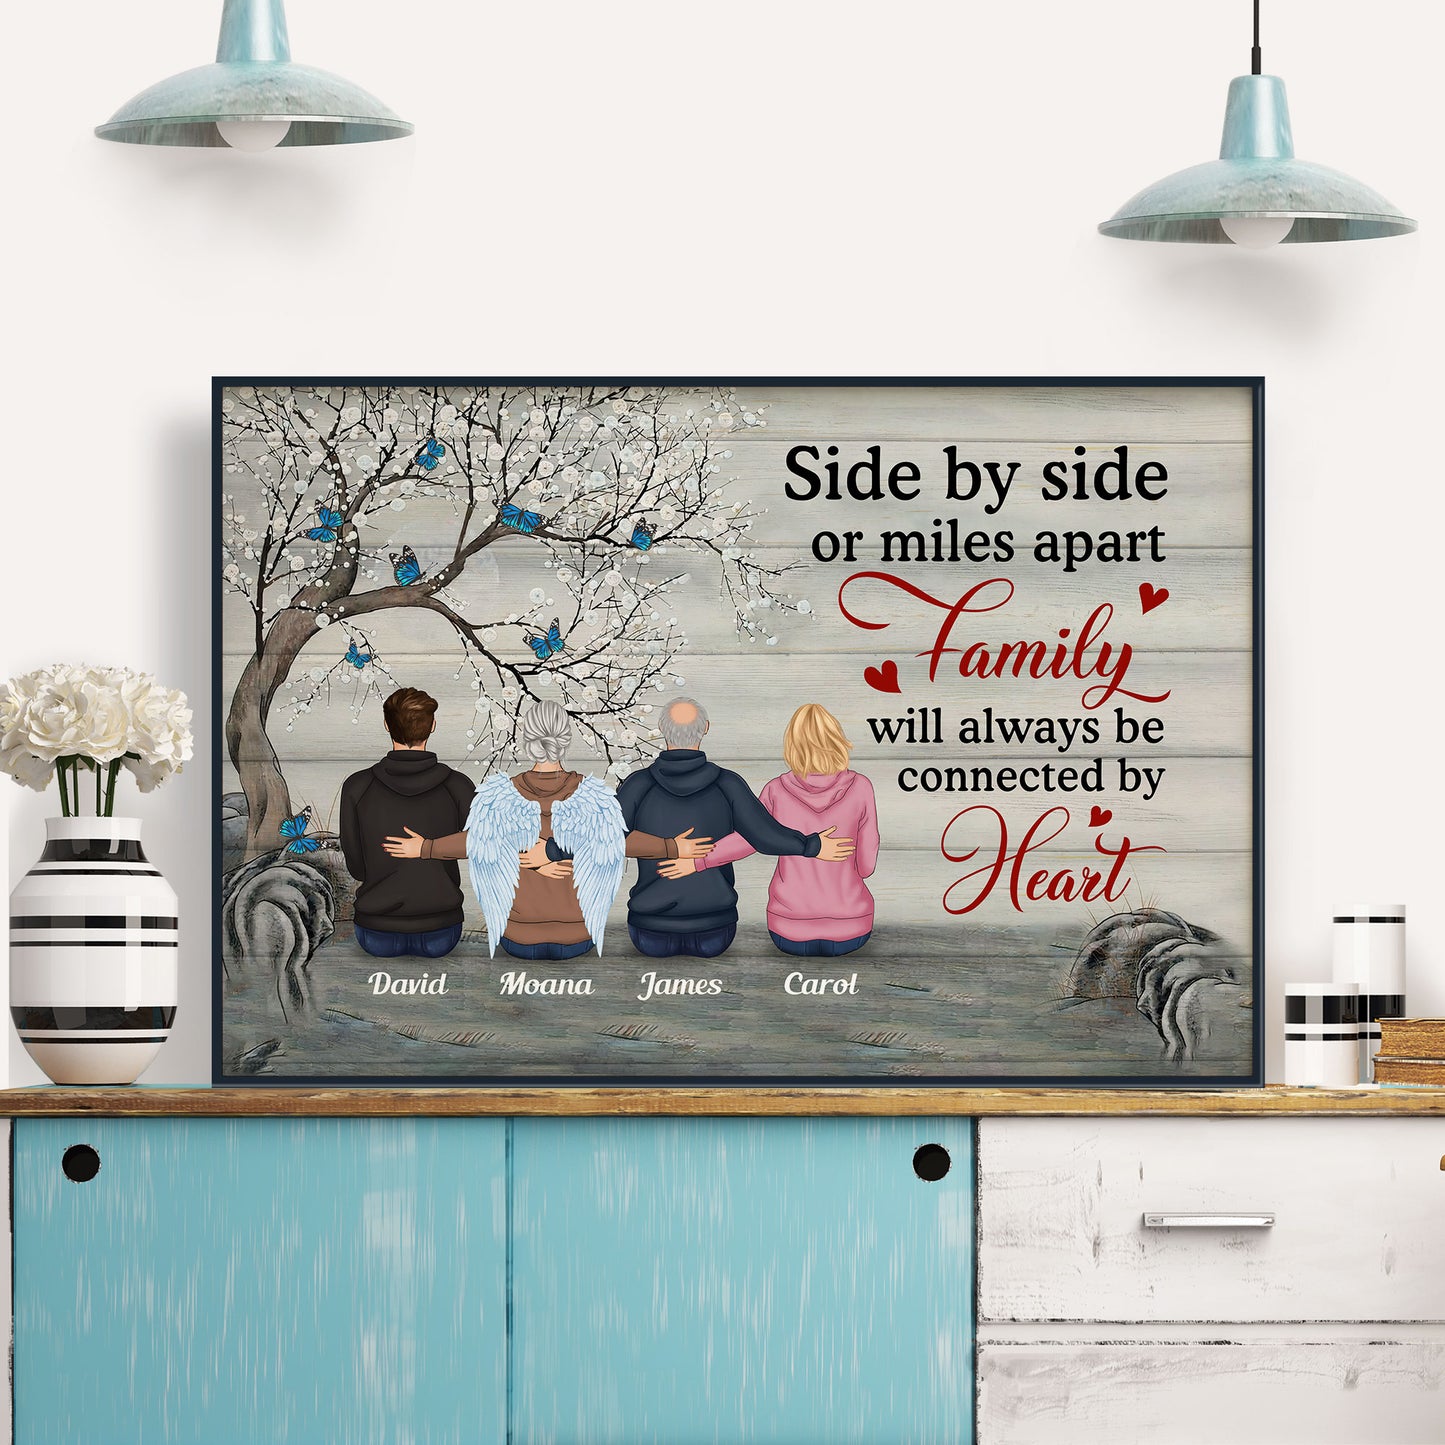 I Am Always With You  - Personalized Poster/Wrapped Canvas - Memorial Gift For Family Members